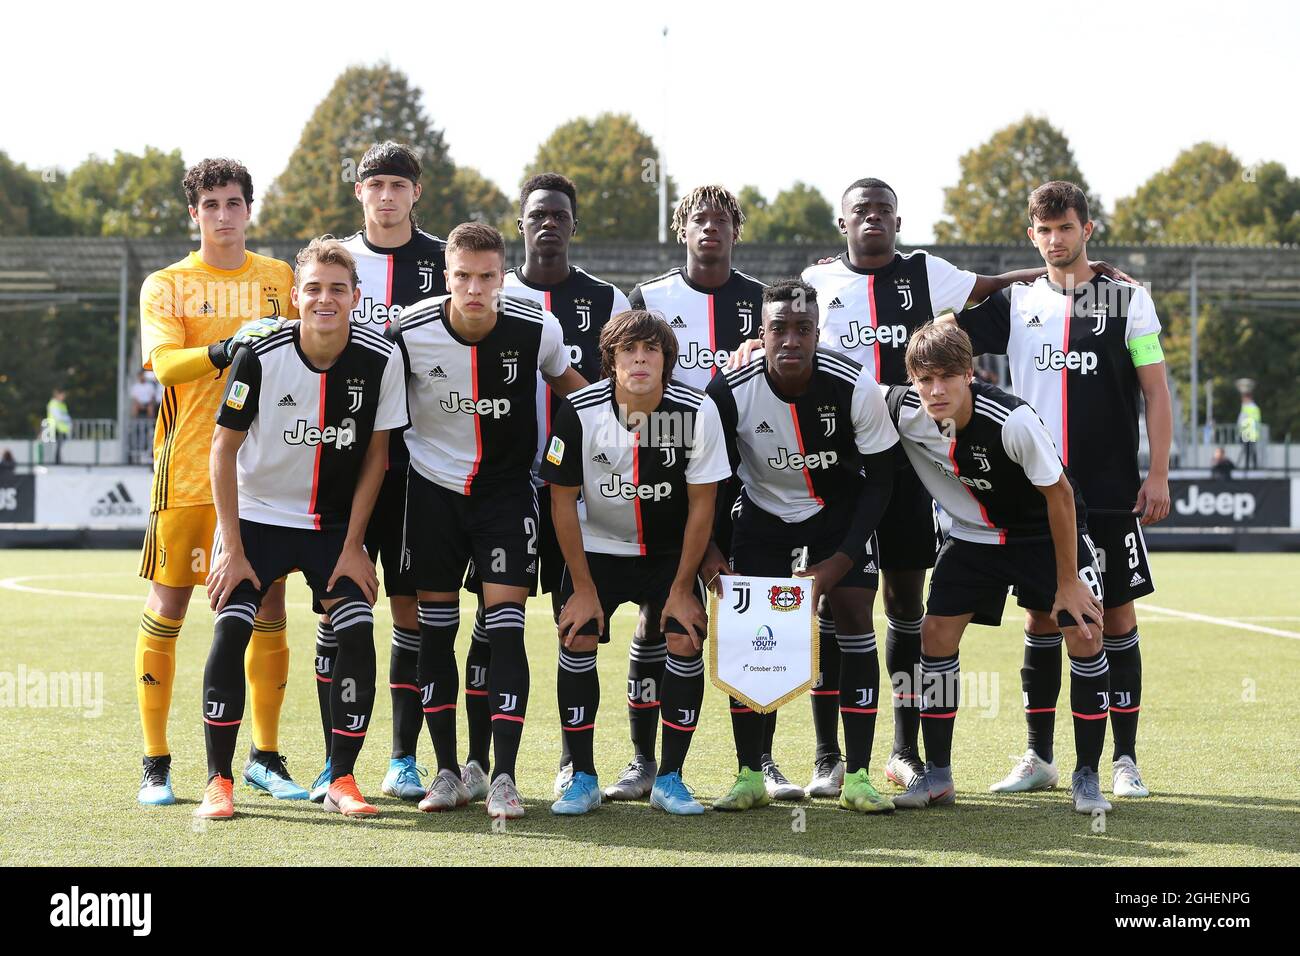 The Juventus starting eleven line up for a team photo, back row ( L to R ); Alessandro Siano, Radu Dragusin, Naouirou Ahamada, Mamadou Kaly Sene, Paolo Gozzi Iweru and Matteo Anzolin, front row ( L to R ); Nikola Sekulov, Daniel Cosimo Osvaldo Leo, Pablo Moreno, Franco Tongya and Nicolo Fagioli during the UEFA Youth Champions League match at the Juventus Center, Vinovo. Picture date: 1st October 2019. Picture credit should read: Jonathan Moscrop/Sportimage via PA Images Stock Photo